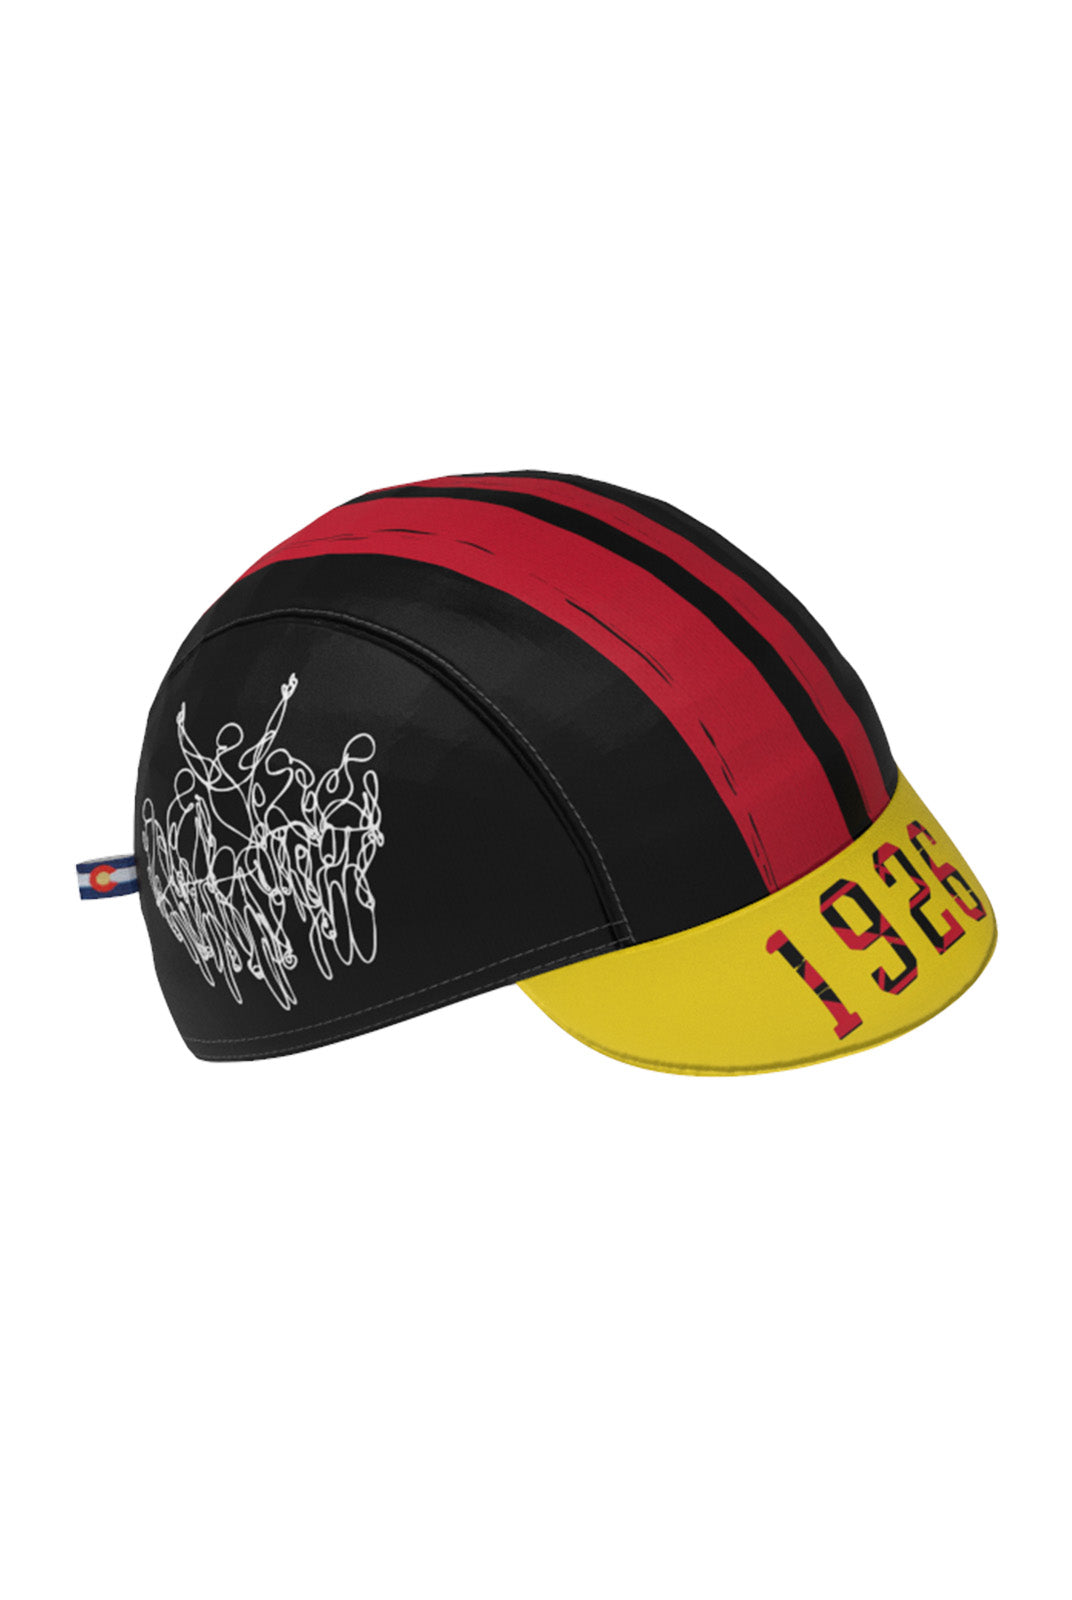 Cycling Cap - Power, Pride, Legacy side view